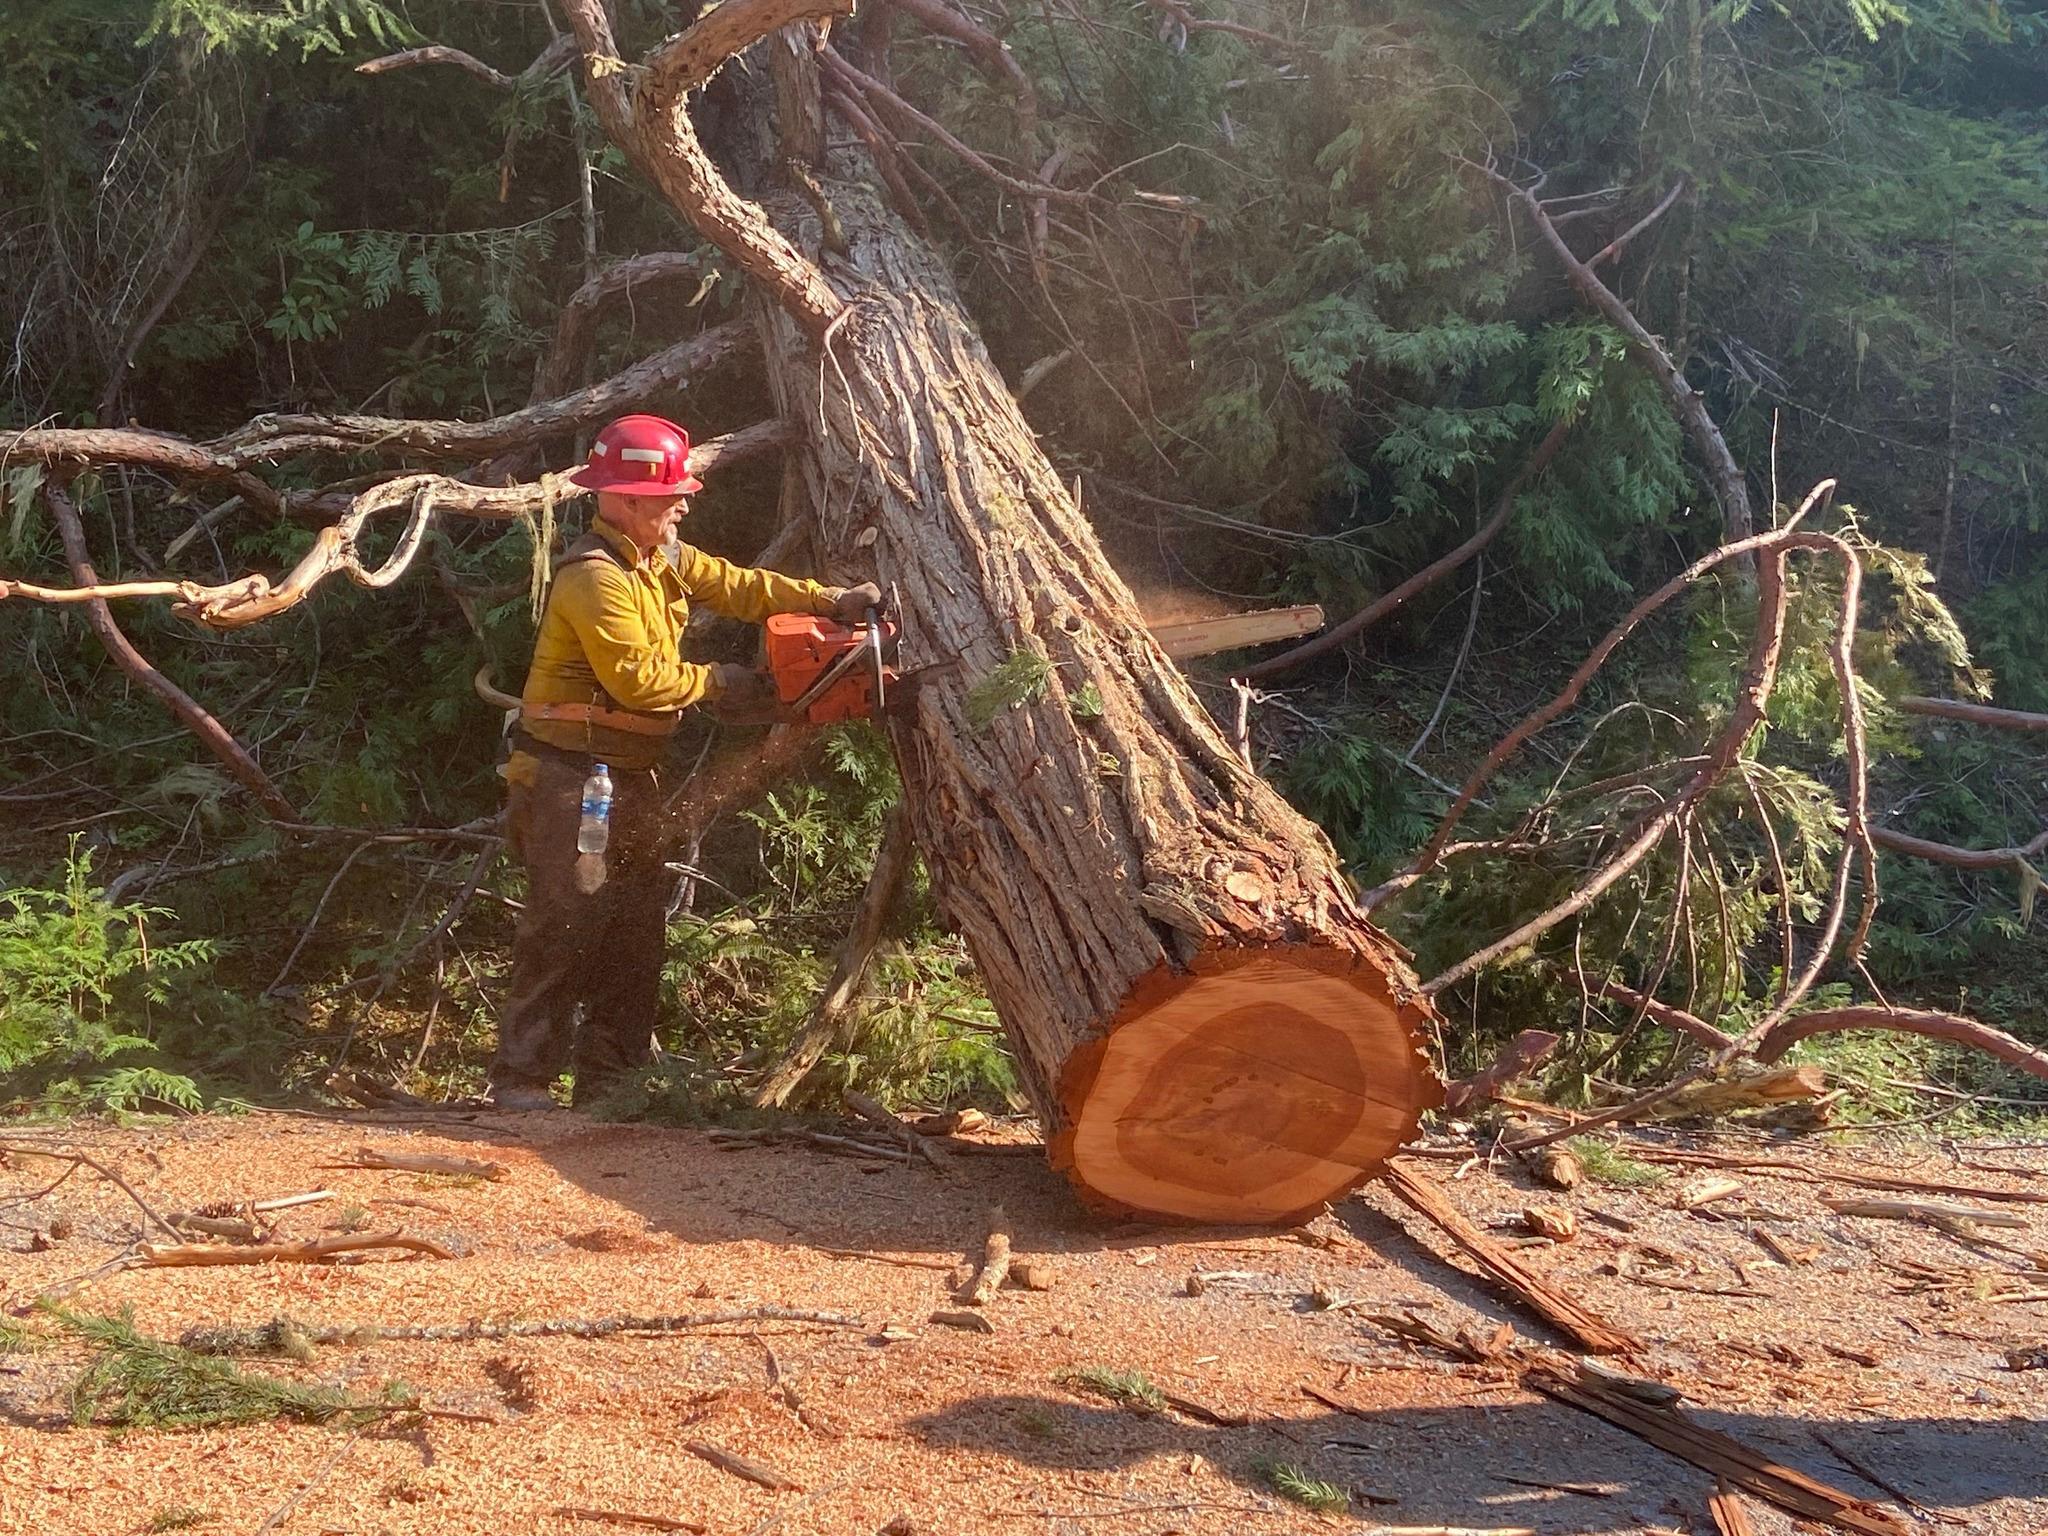 A large tree that had fallen on the road is being cut into pieces by a firefighter in a yellow shirt, green pants, and red helmet by using a chainsaw.